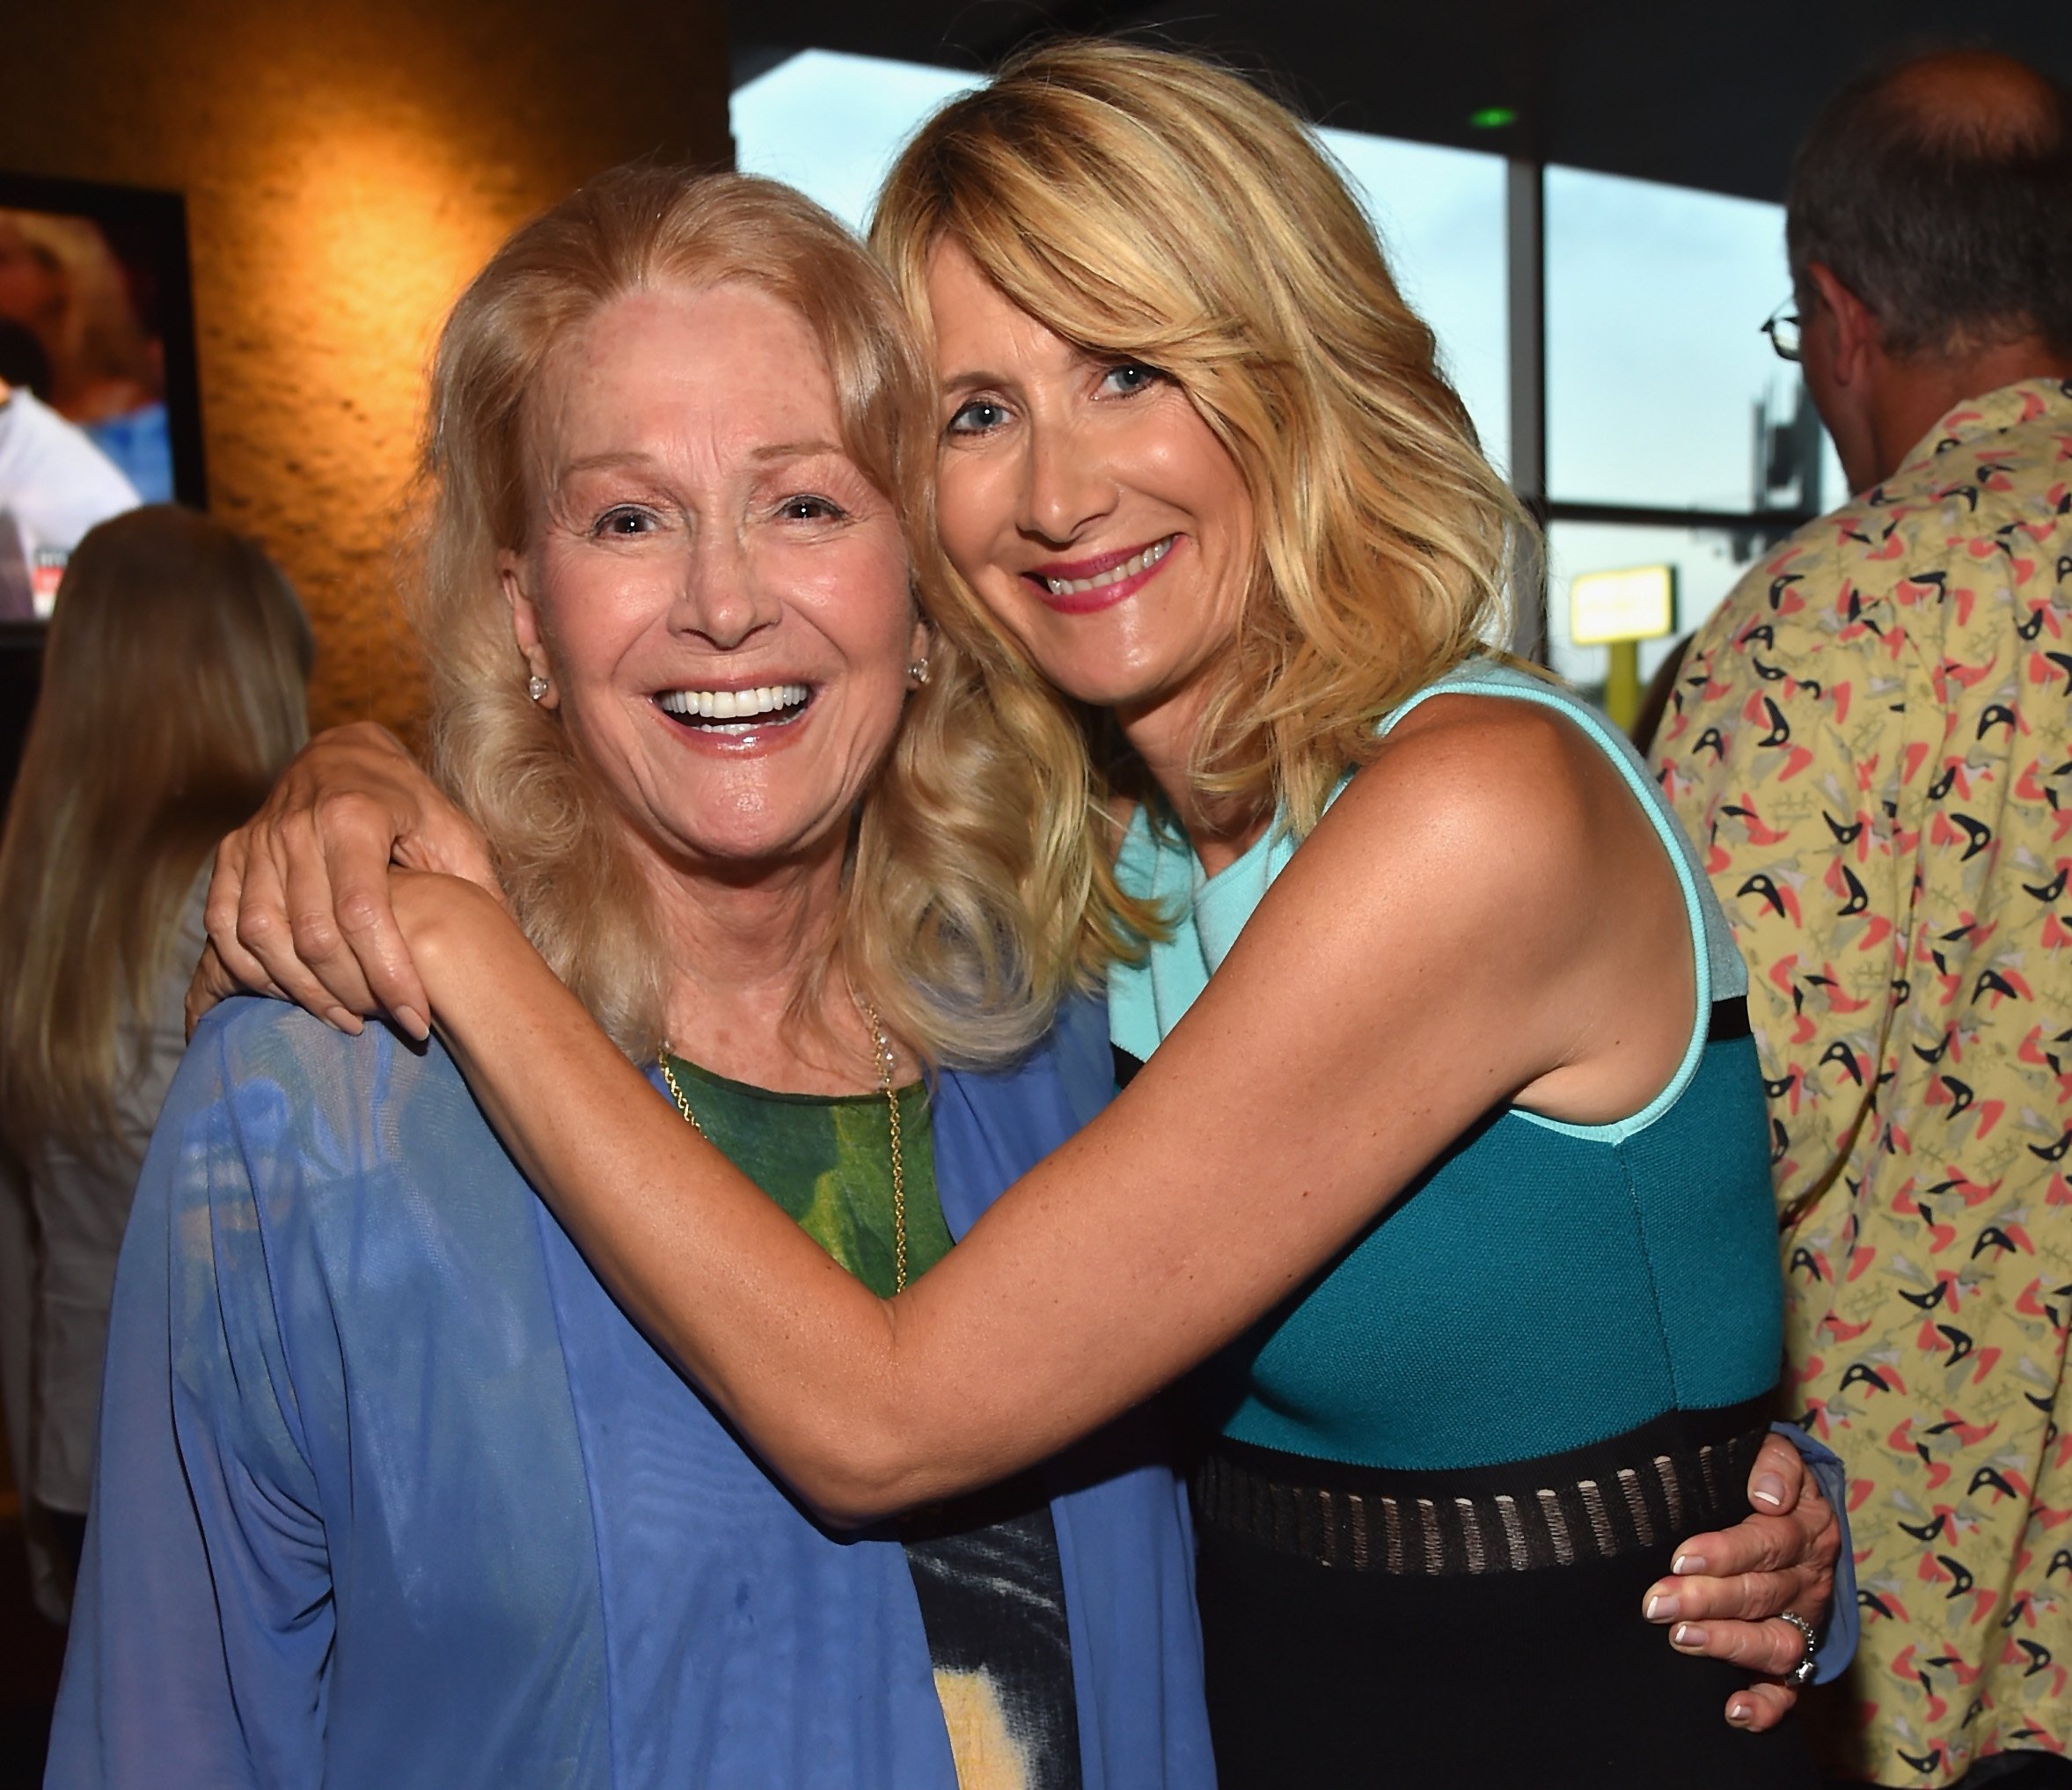 Diane Ladd and Laura Dern attend a special screening of "99 Homes" on August 31, 2015 in Los Angeles, California | Source: Getty Images 